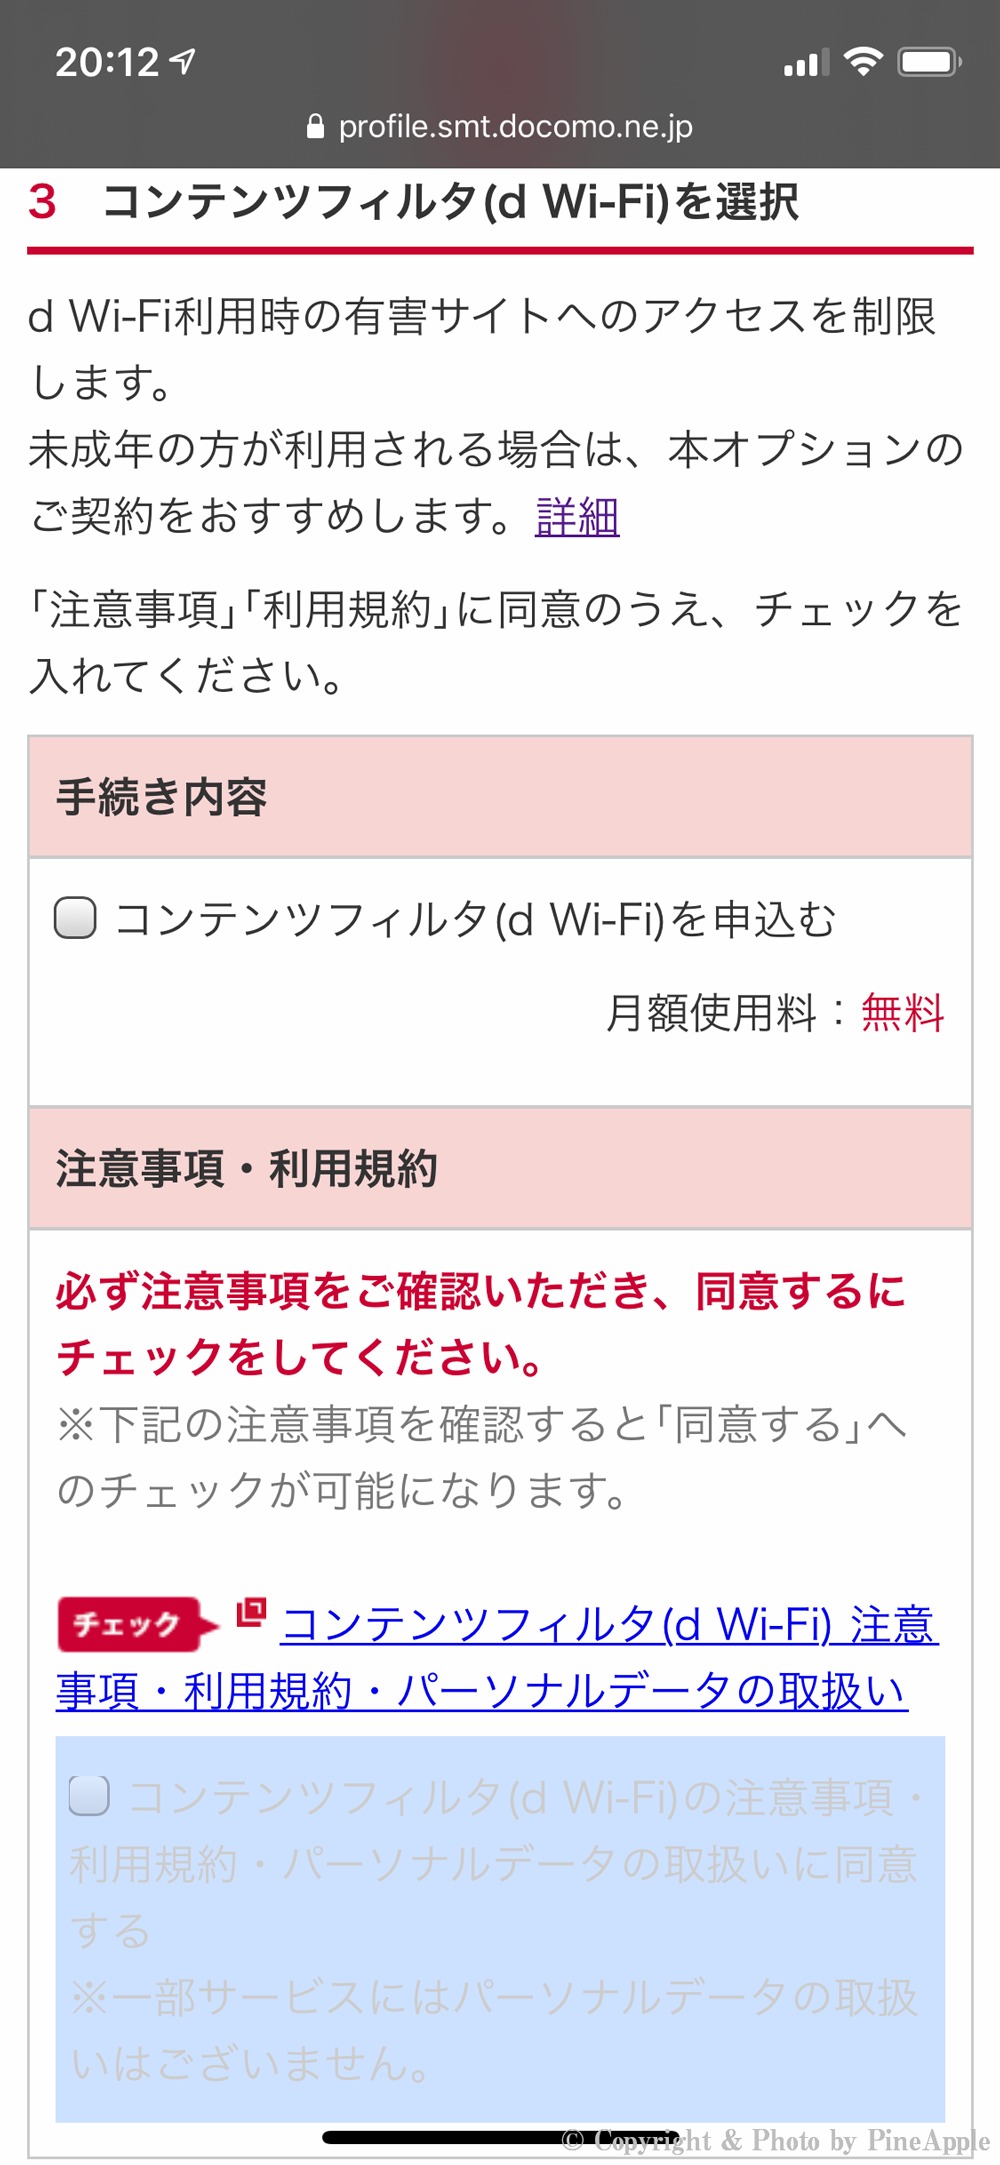 d Wi-Fi："コンテンツフィルタ（d Wi-Fi）を申込む" を選択